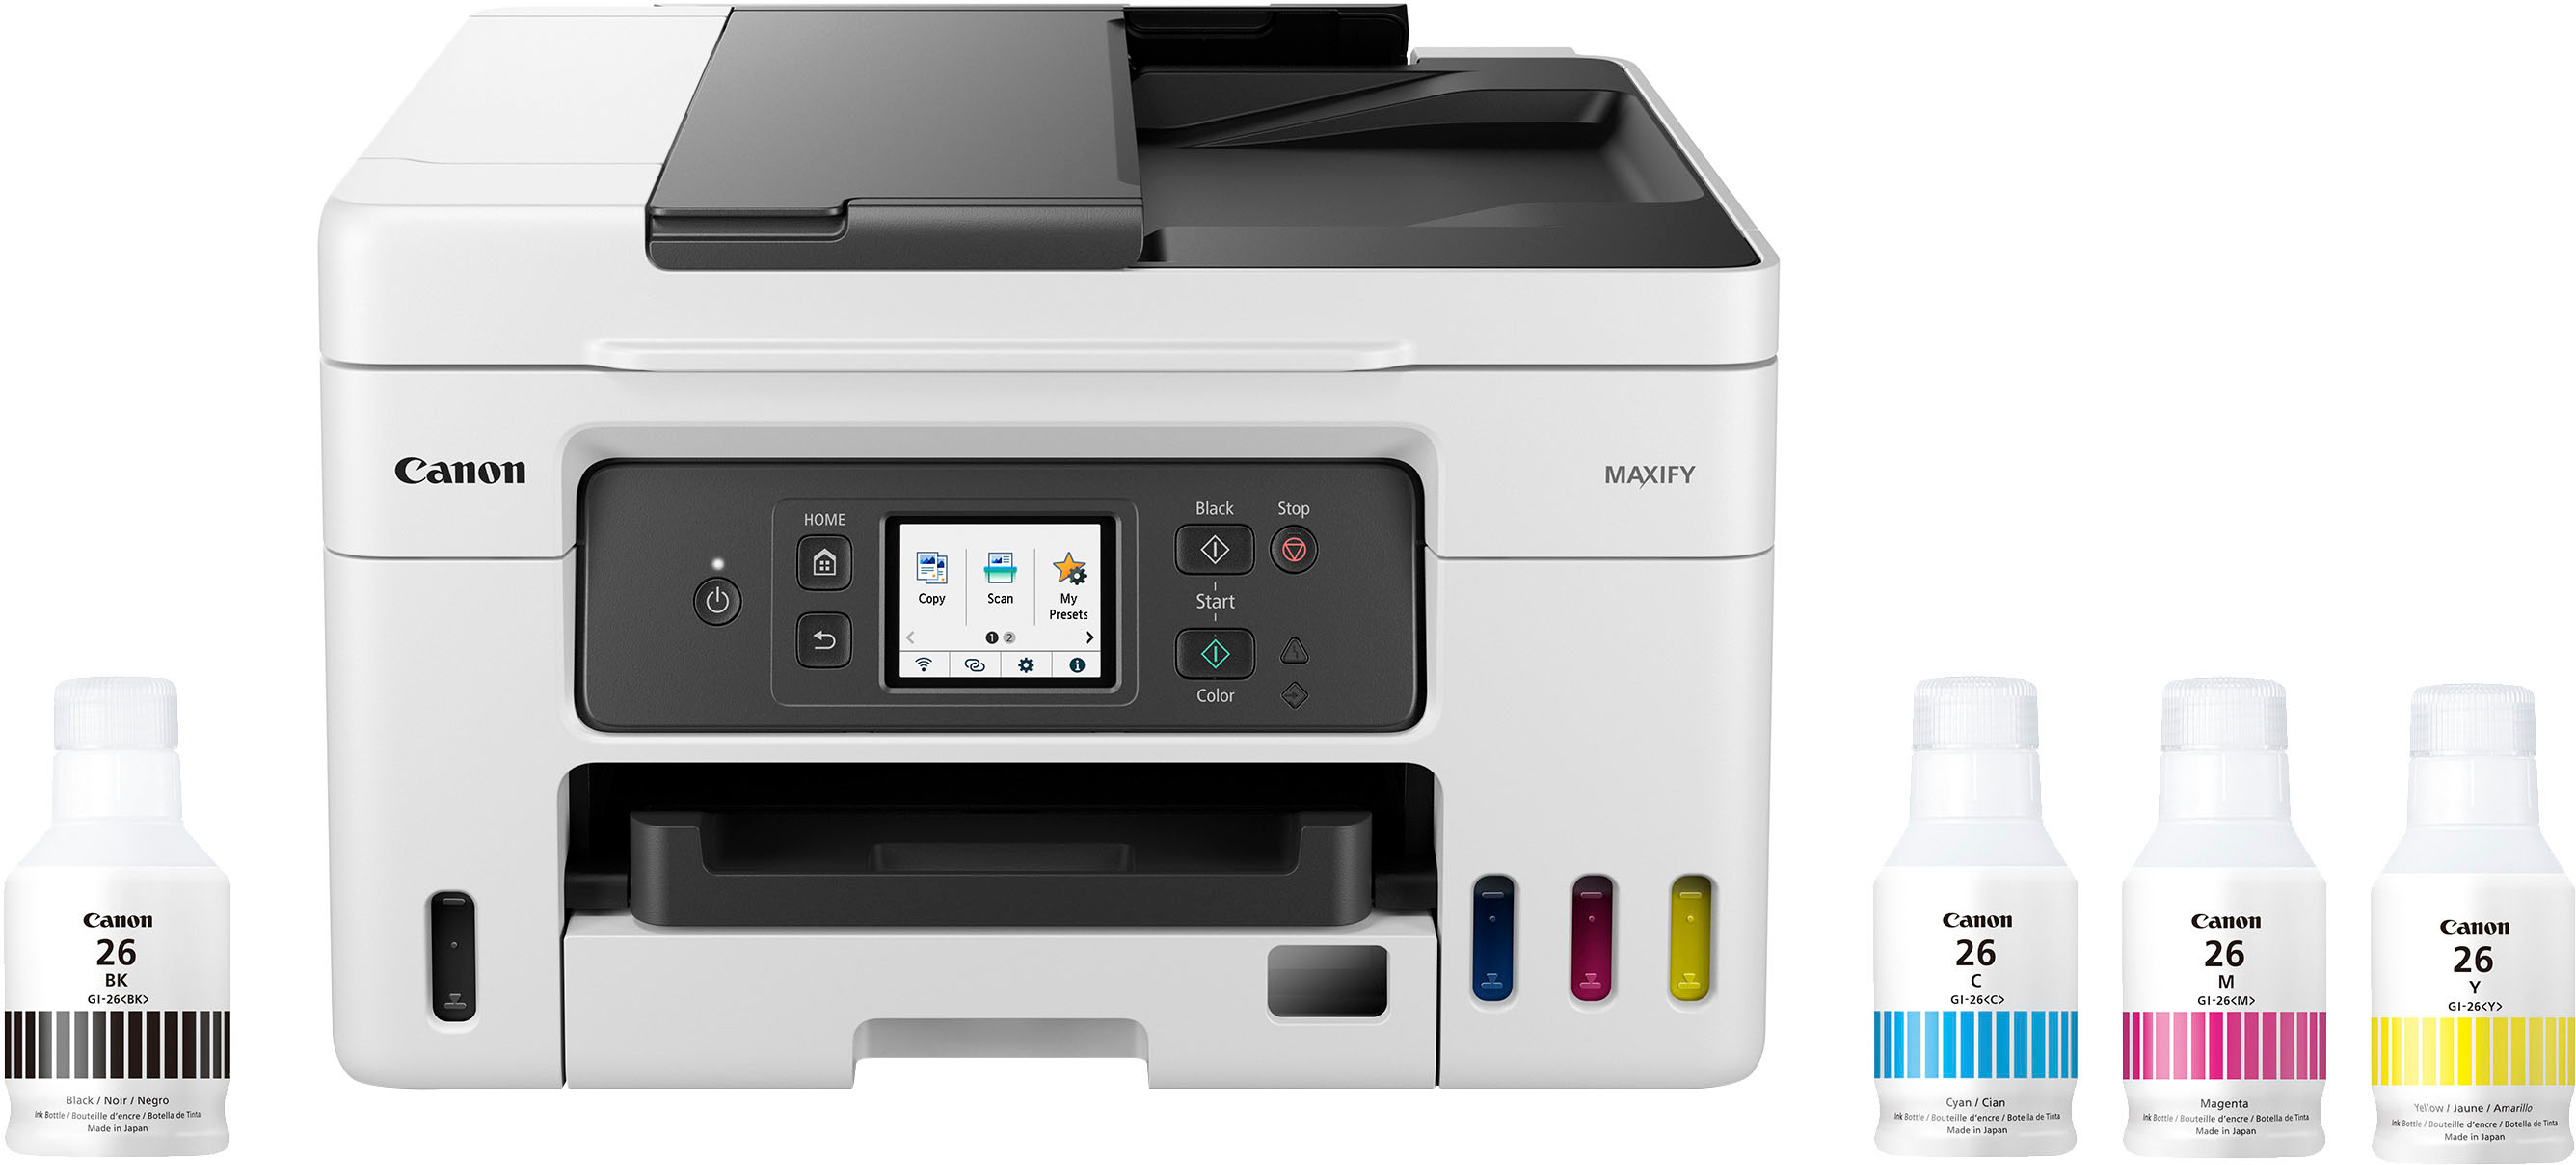 Which Printer Is Best for Card Stock and Scrapbooking?